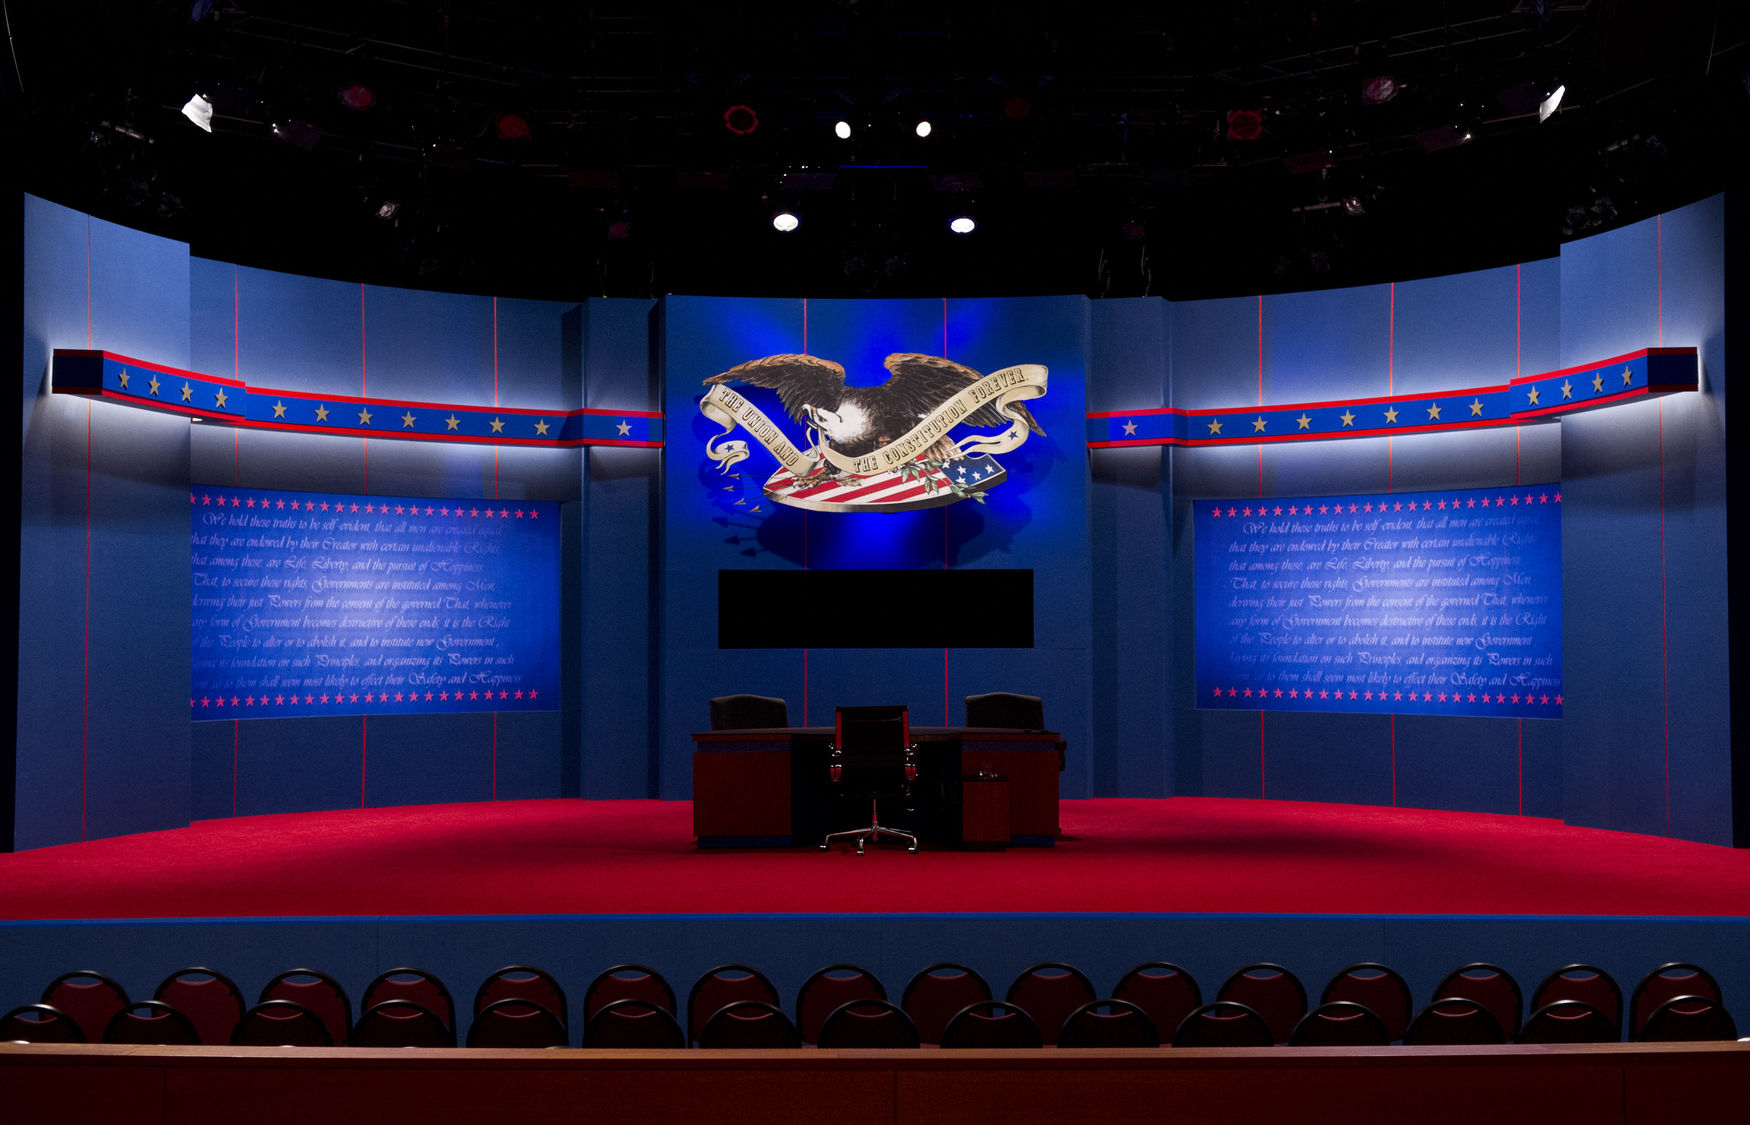 This lawsuit could get your third-party candidate on the presidential debate stage